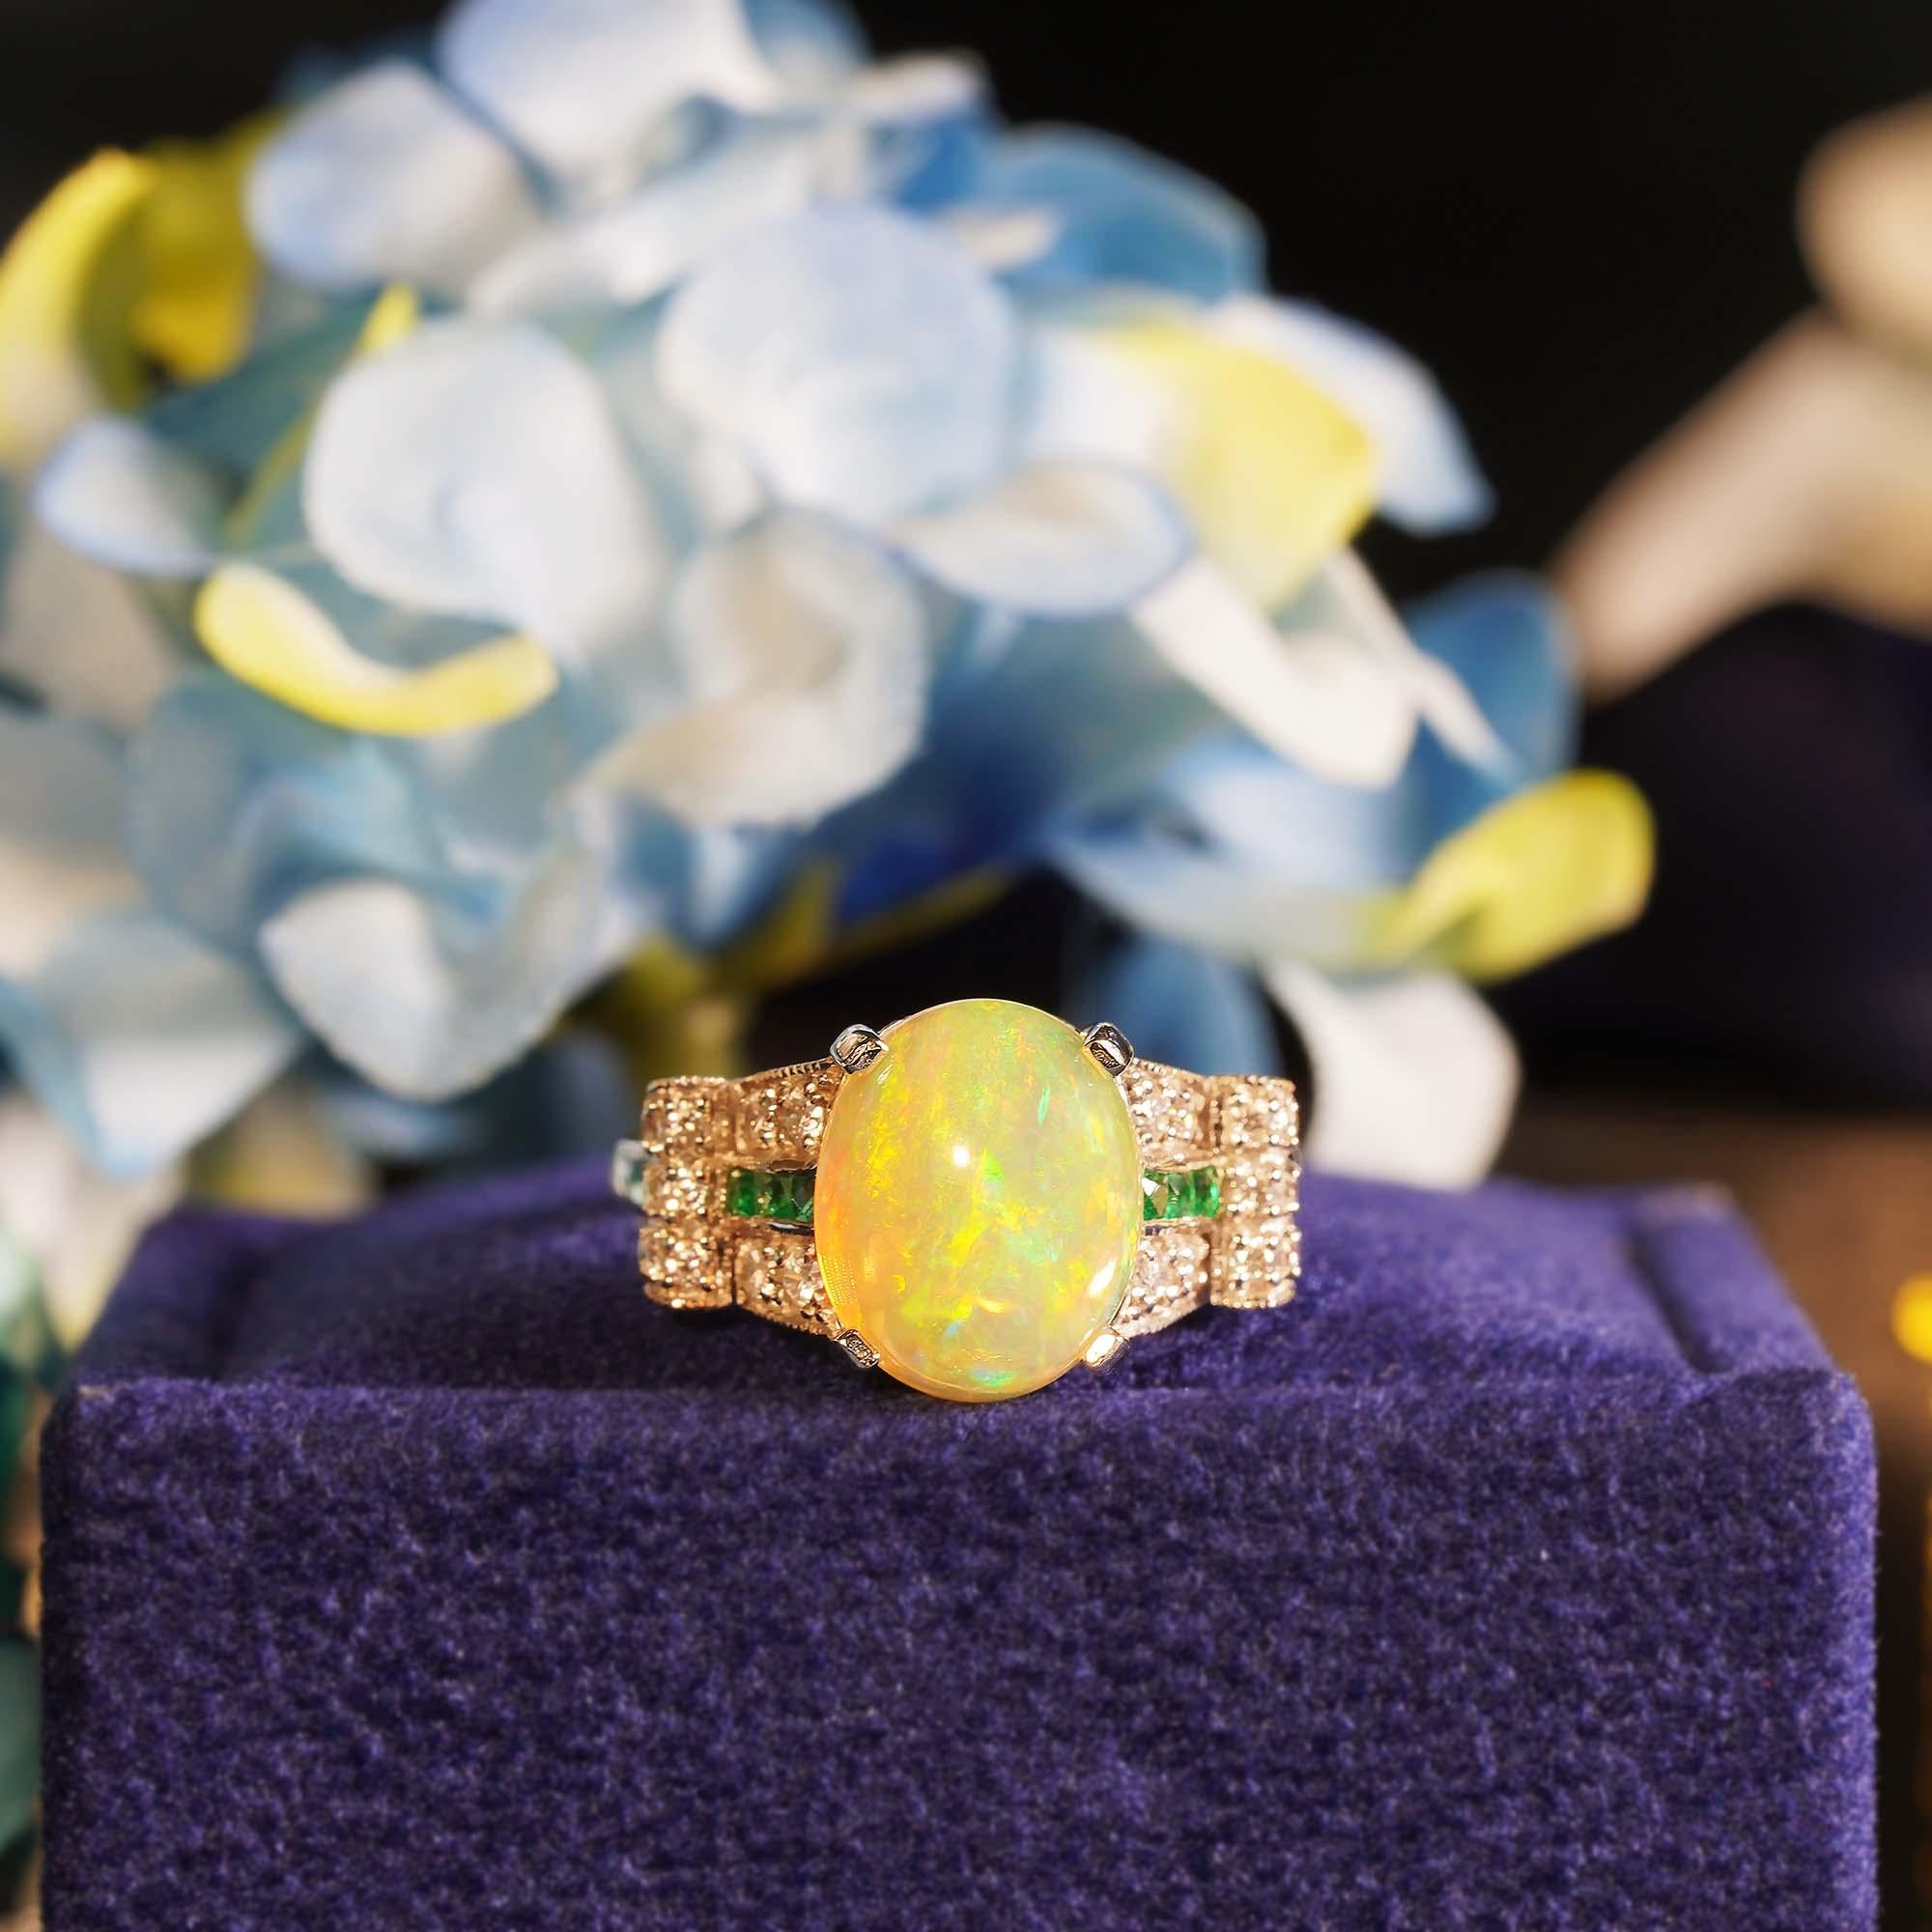 A well balanced Art Deco inspired ring that has a central 2.46 carats play-of-color Ethiopian opal with French cut emerald and shimmering diamonds on either side. This gorgeous ring would make a perfect engagement ring.

Ring Information
Style: